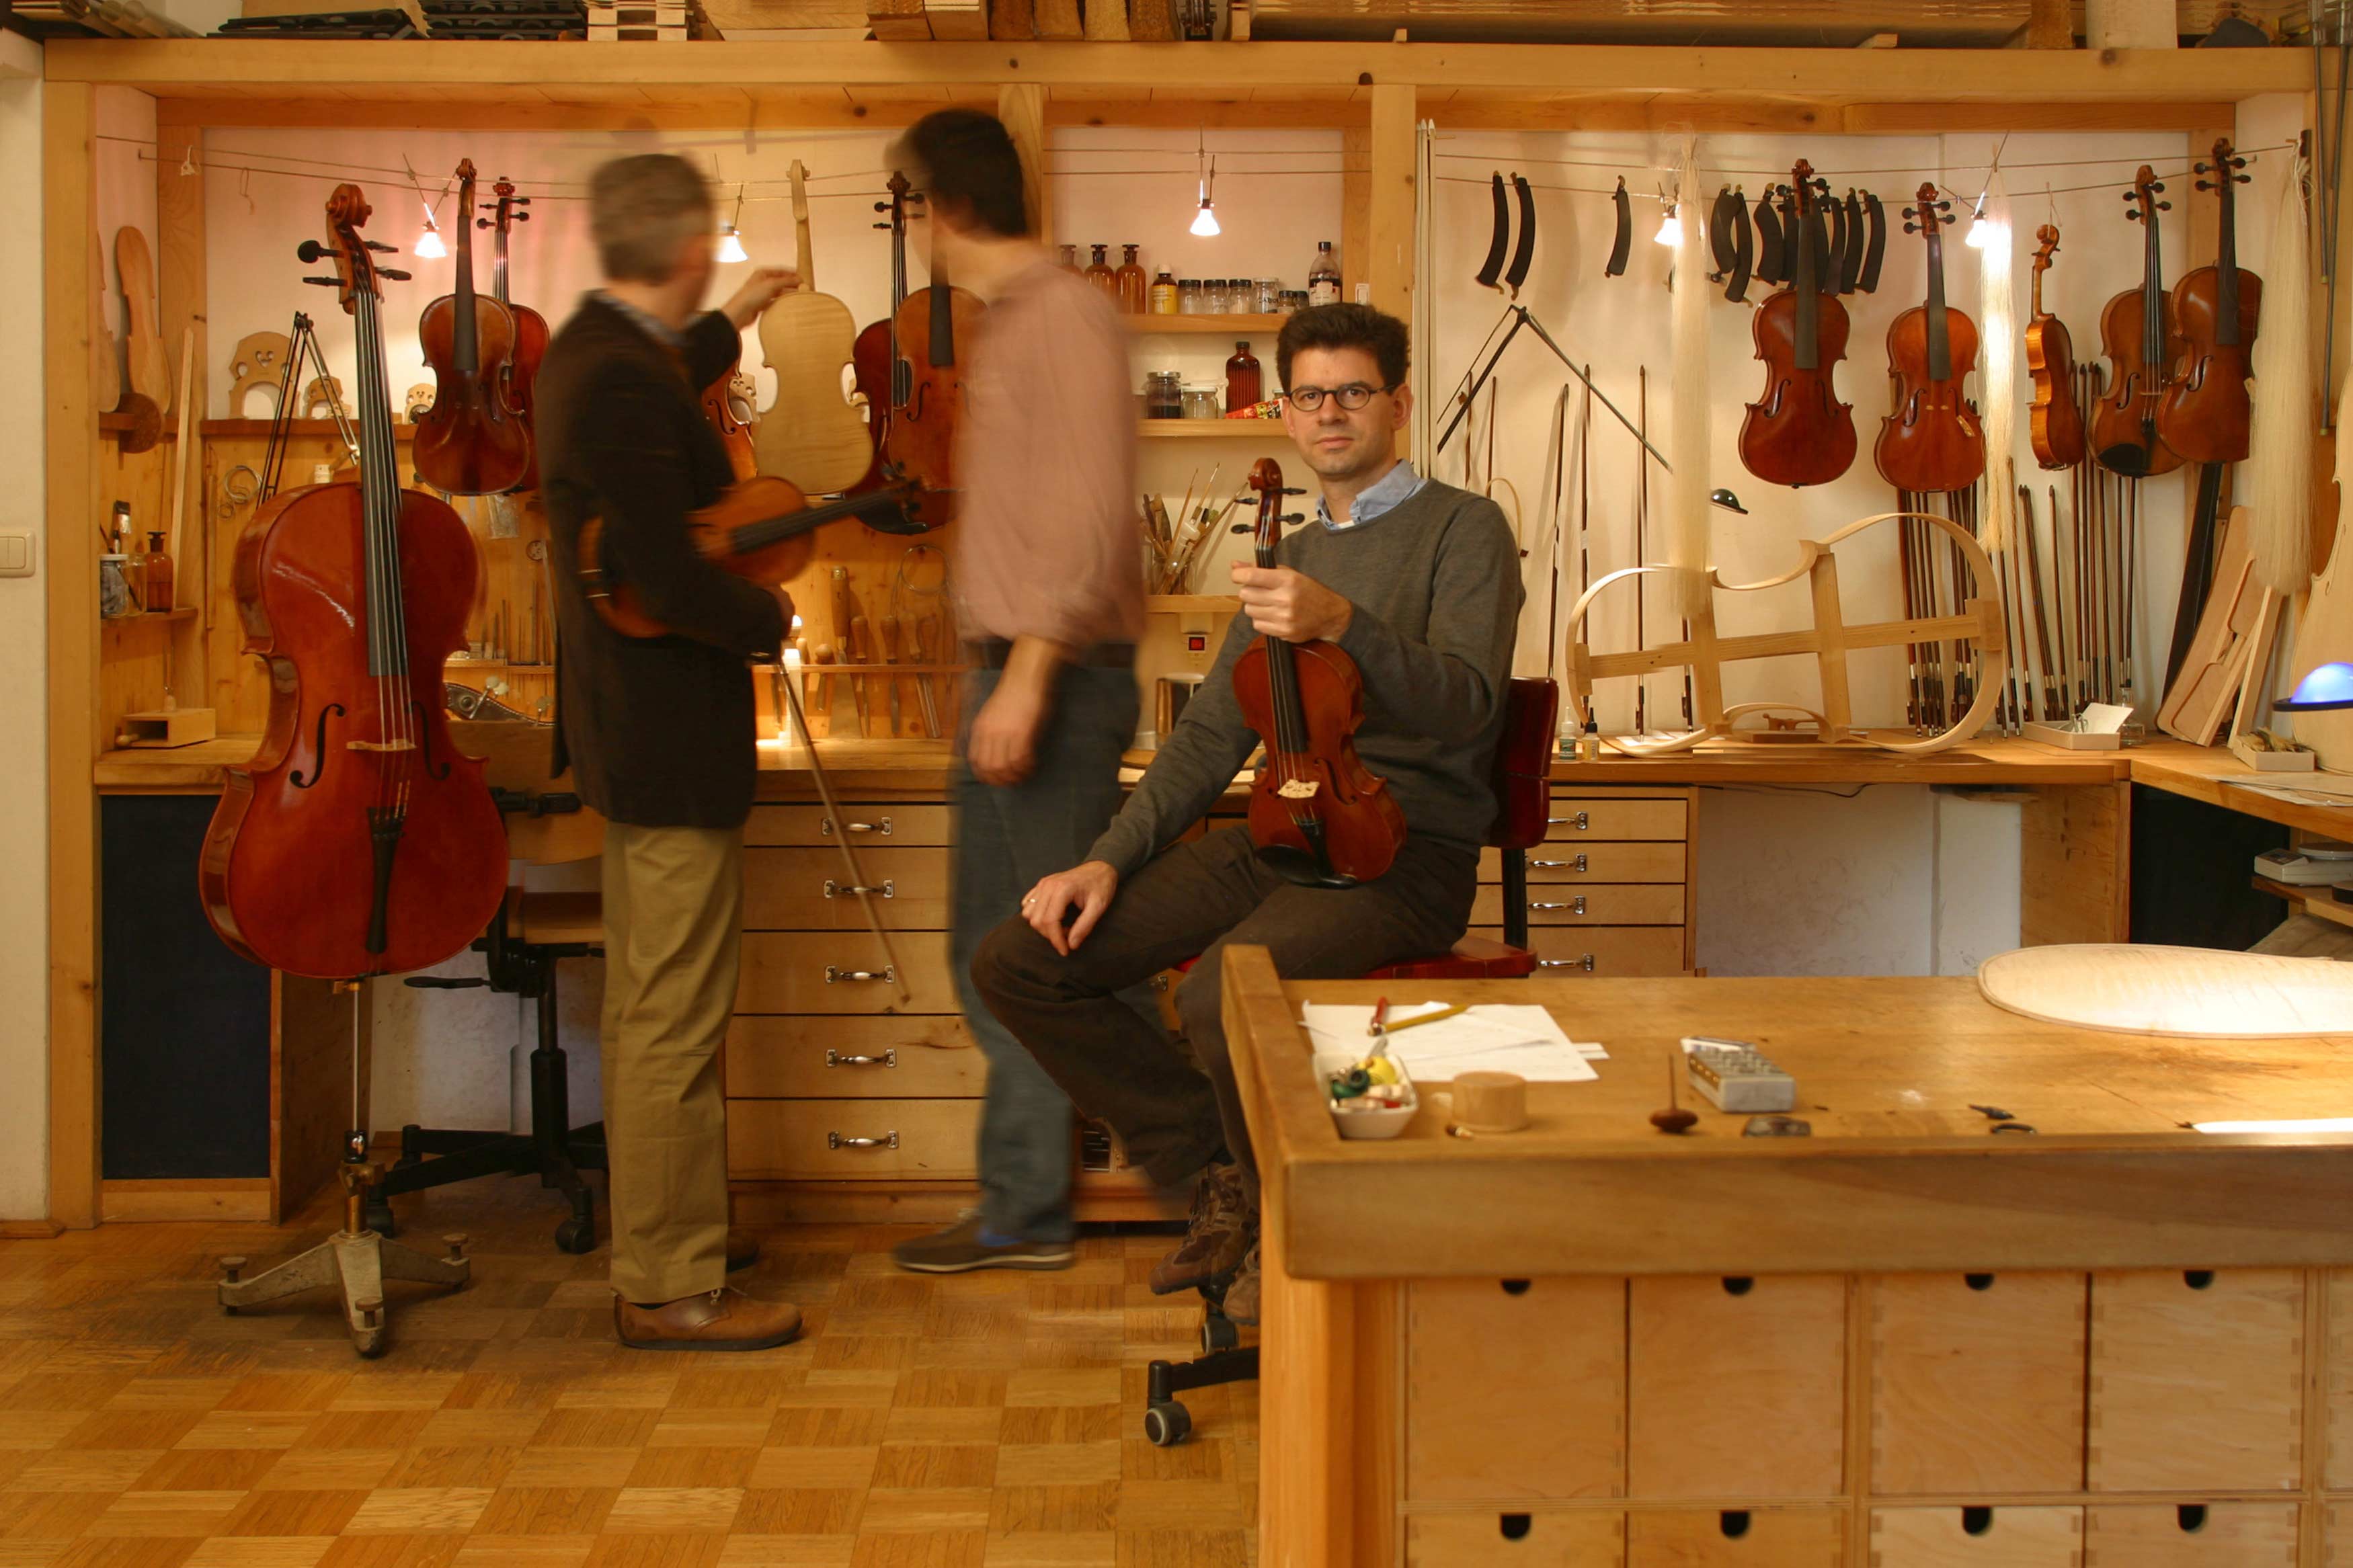 Inside violin maker's workshop. Violin maker sits beside workbench and holds violin in his hand. 2 persons standing behind him and looking at instruments.